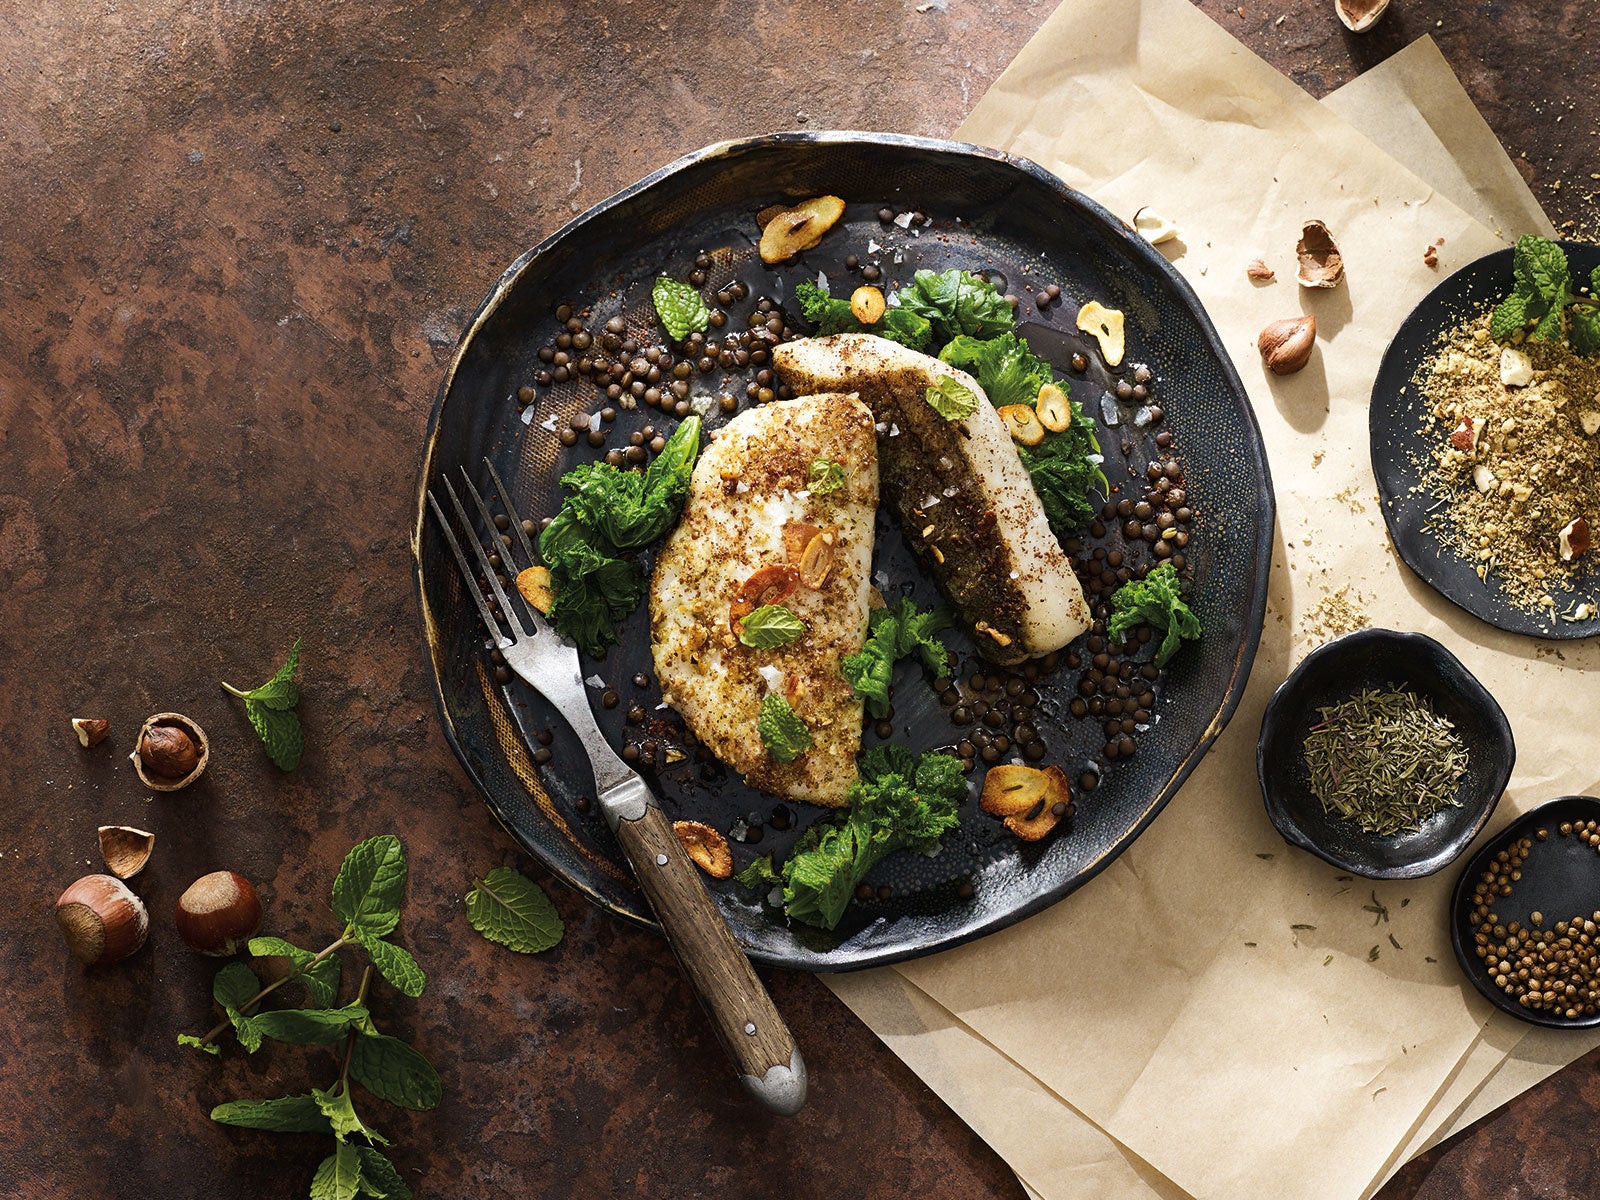 Dukkah-Crusted Wild Alaska Pollock with Lentils and Greens